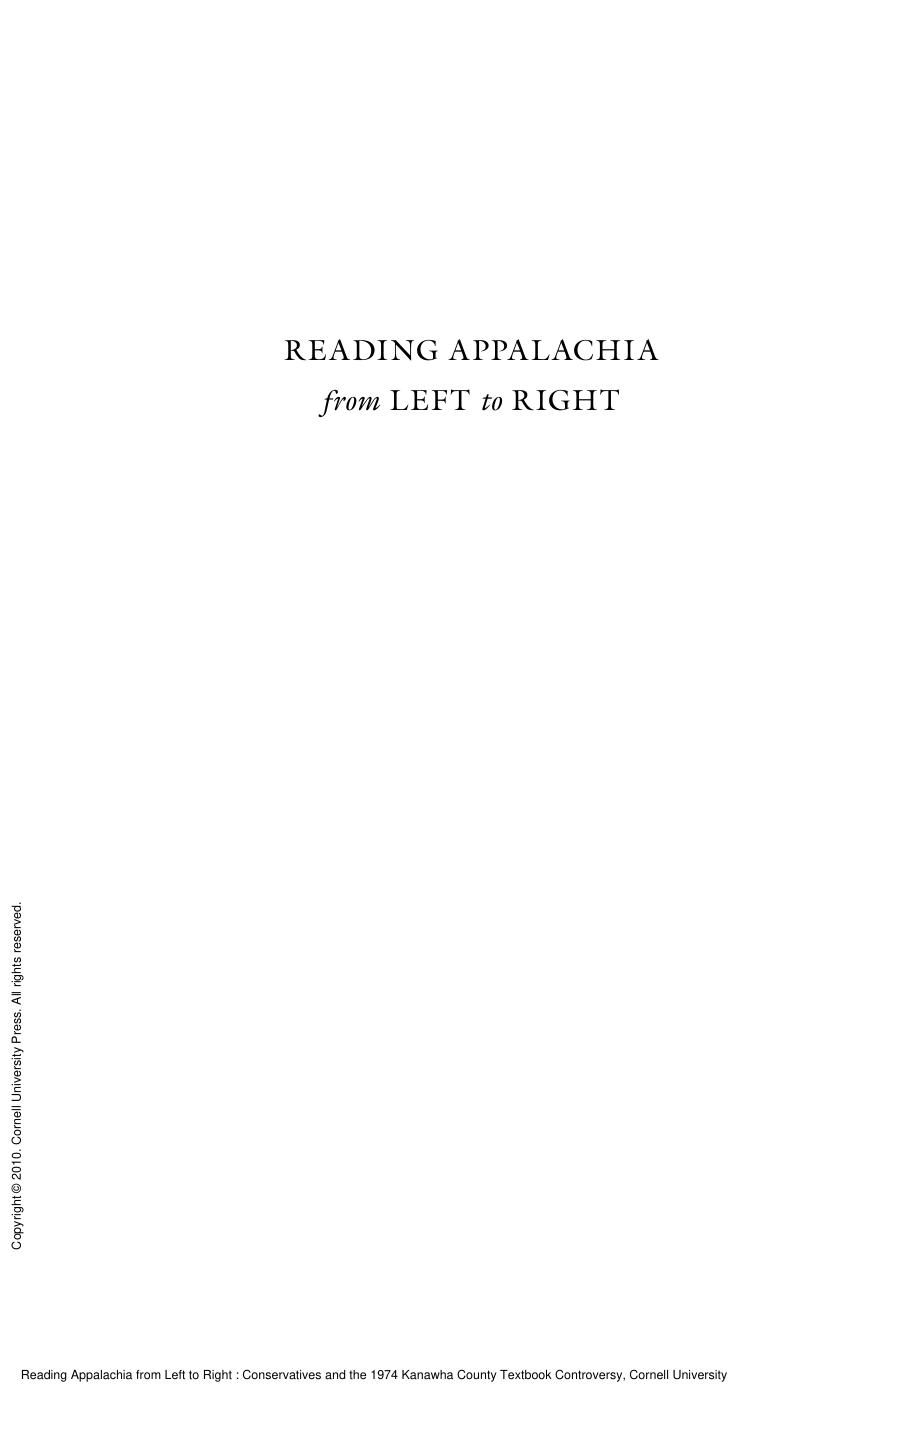 Reading Appalachia from Left to Right : Conservatives and the 1974 Kanawha County Textbook Controversy by Carol Mason